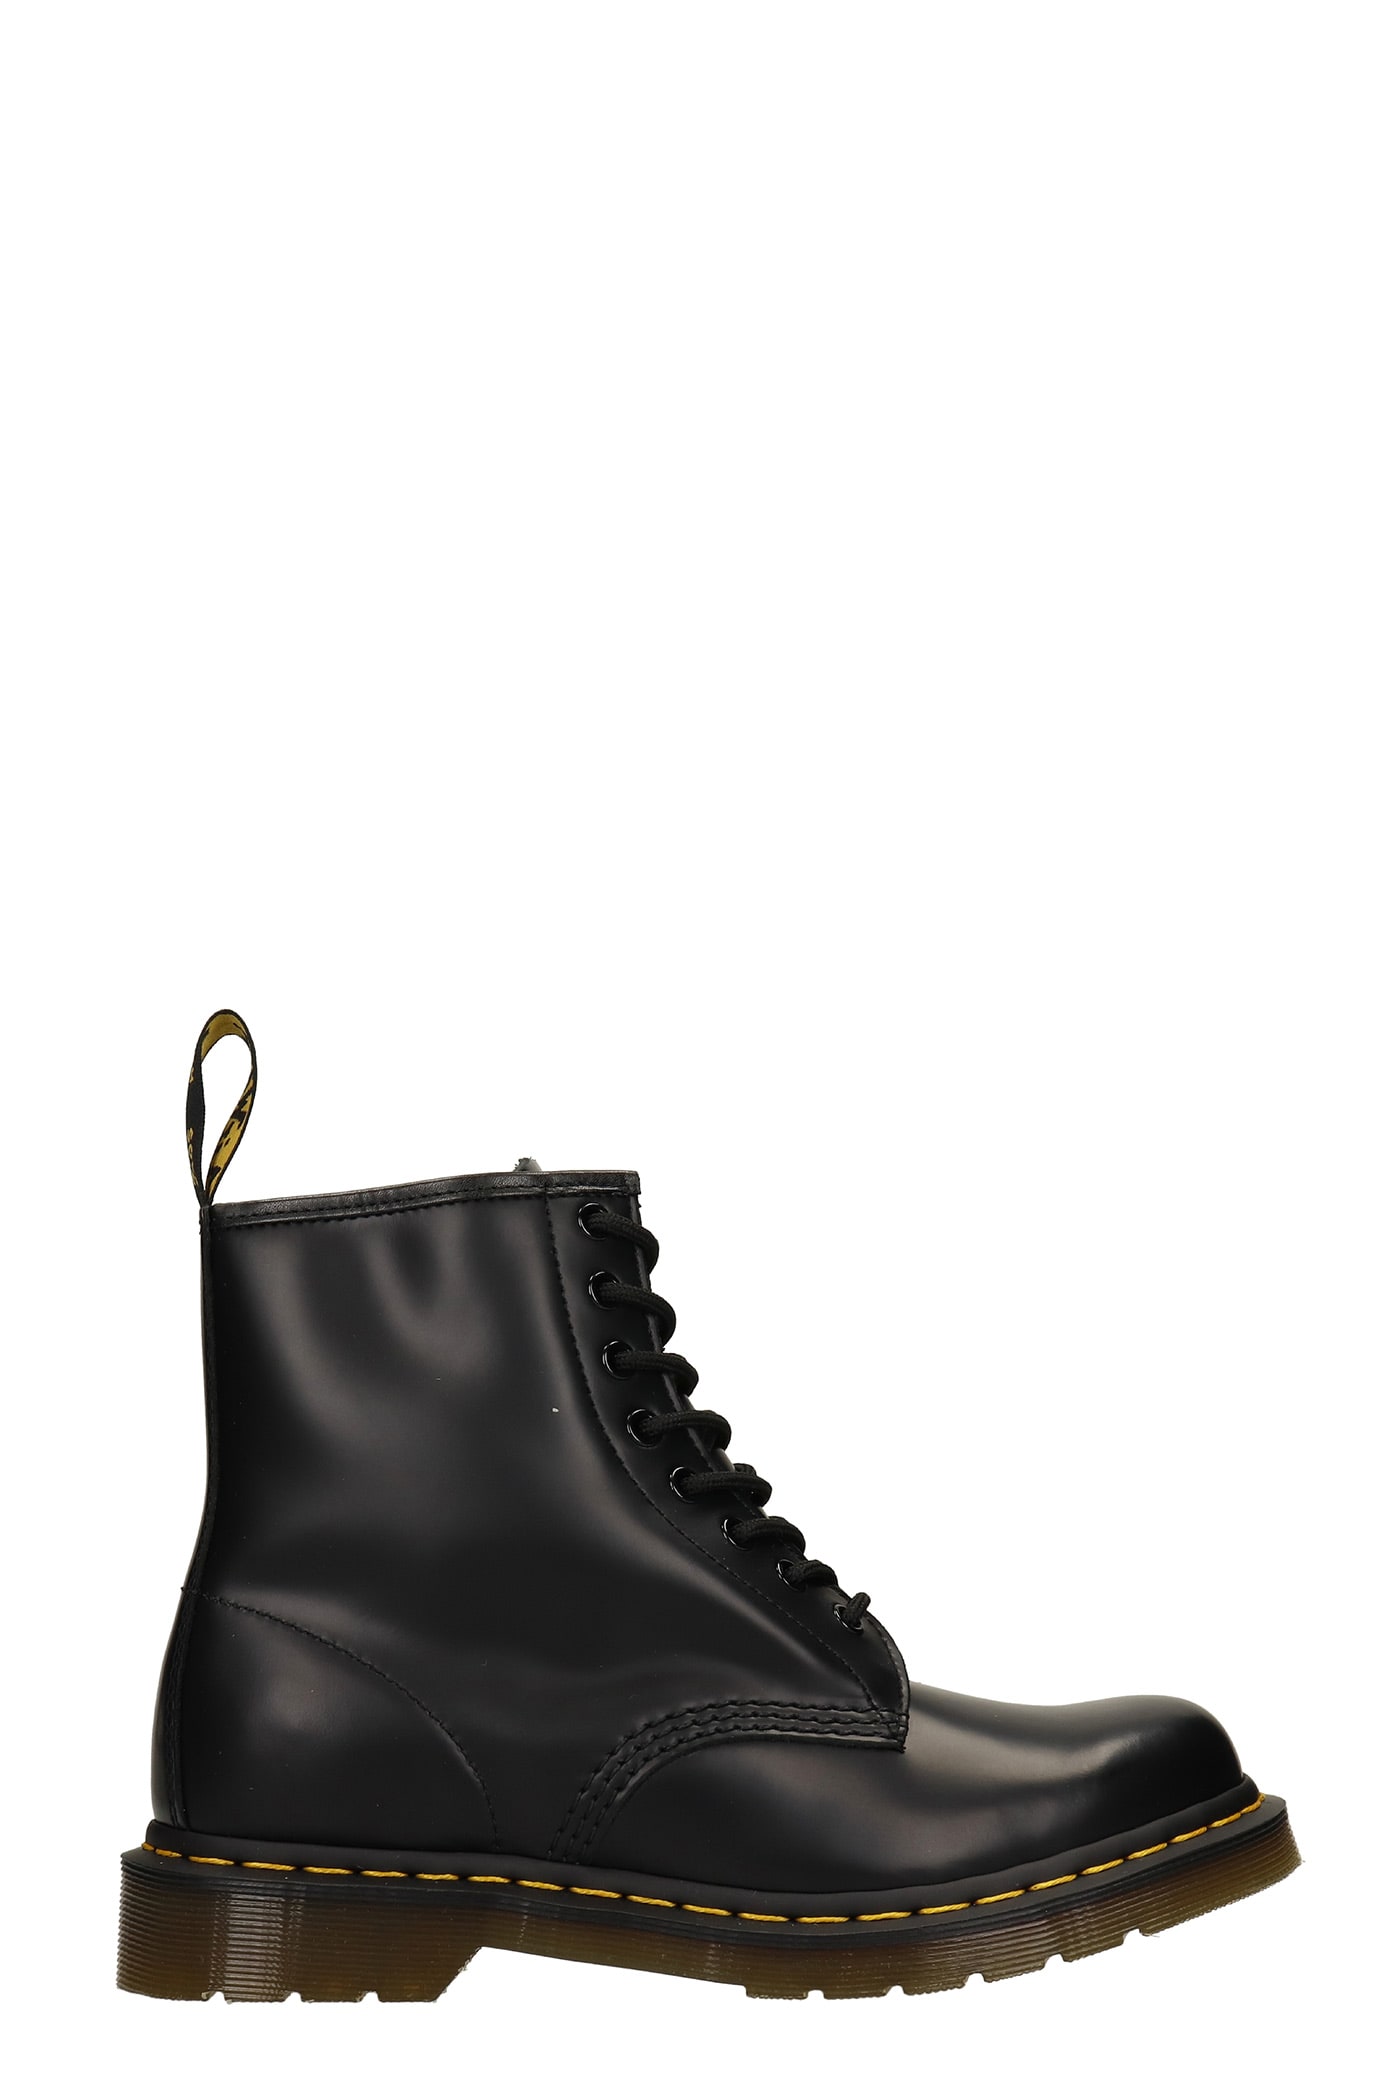 Dr. Martens 1460 Combat Boots In Black Leather